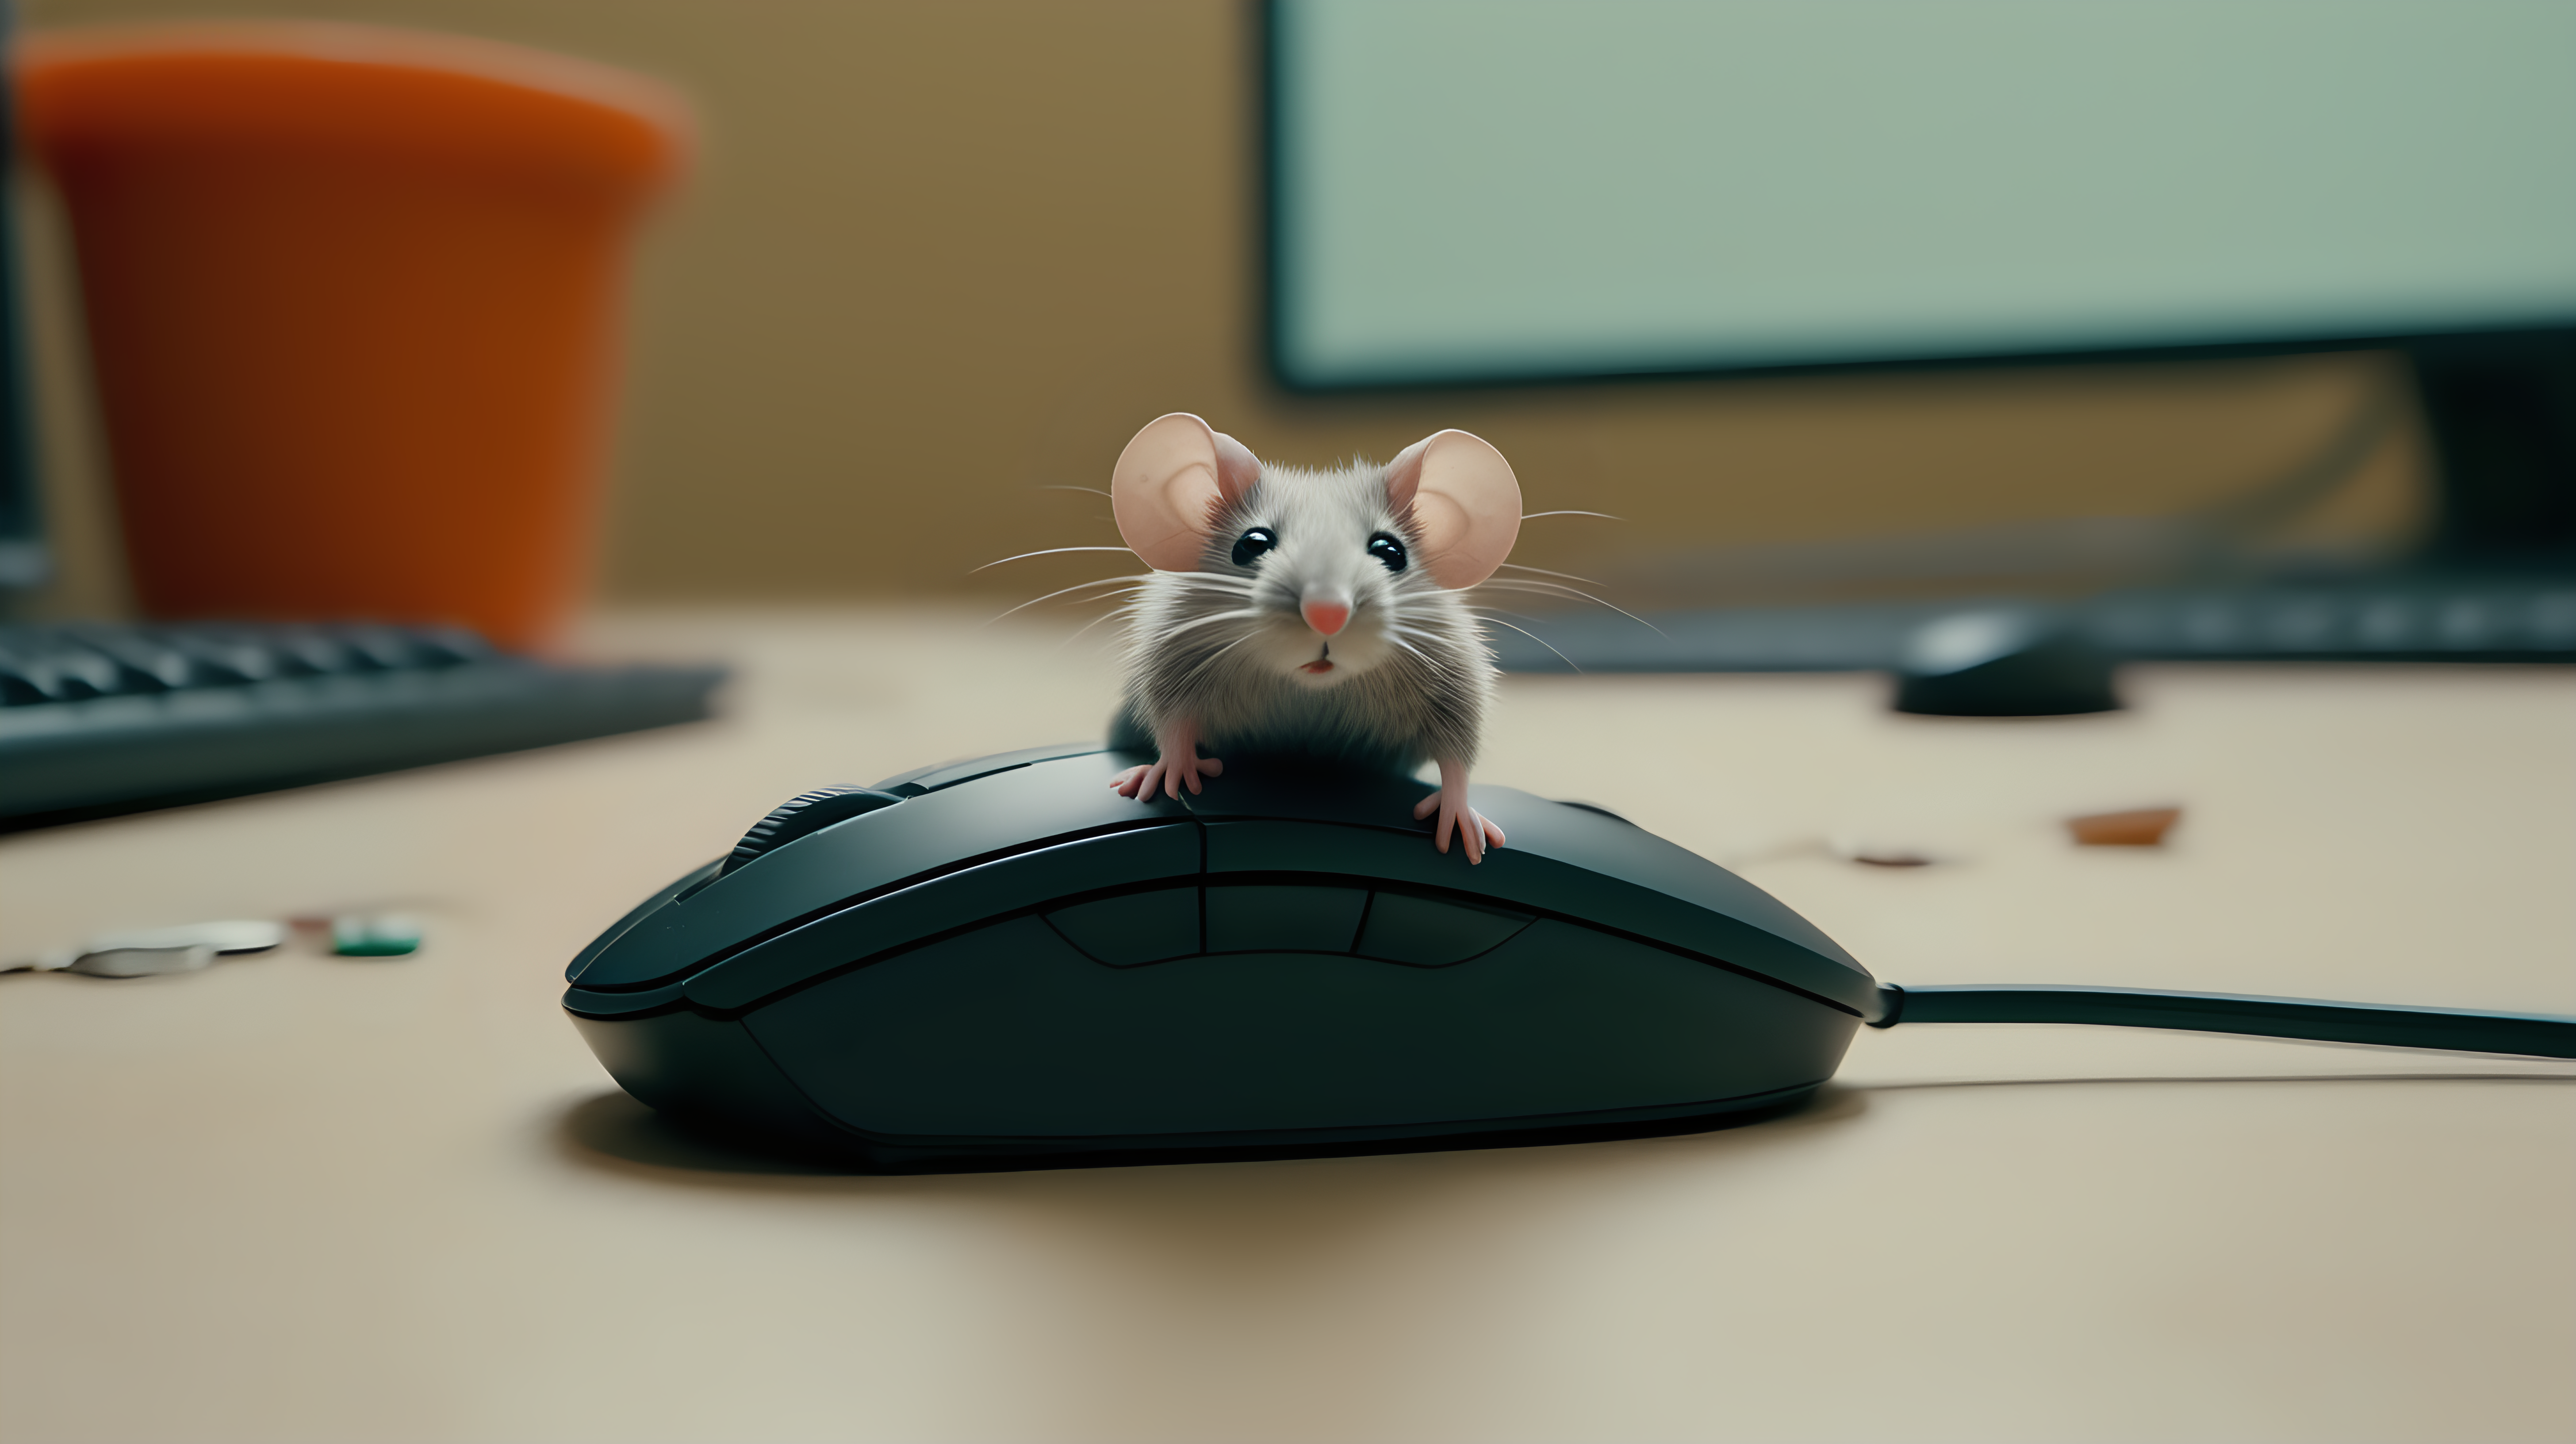 a small, cute fuzzy toy mouse sits on an upside-down real computer mouse that's been discarded in the trash  in the style of a  wes anderson film